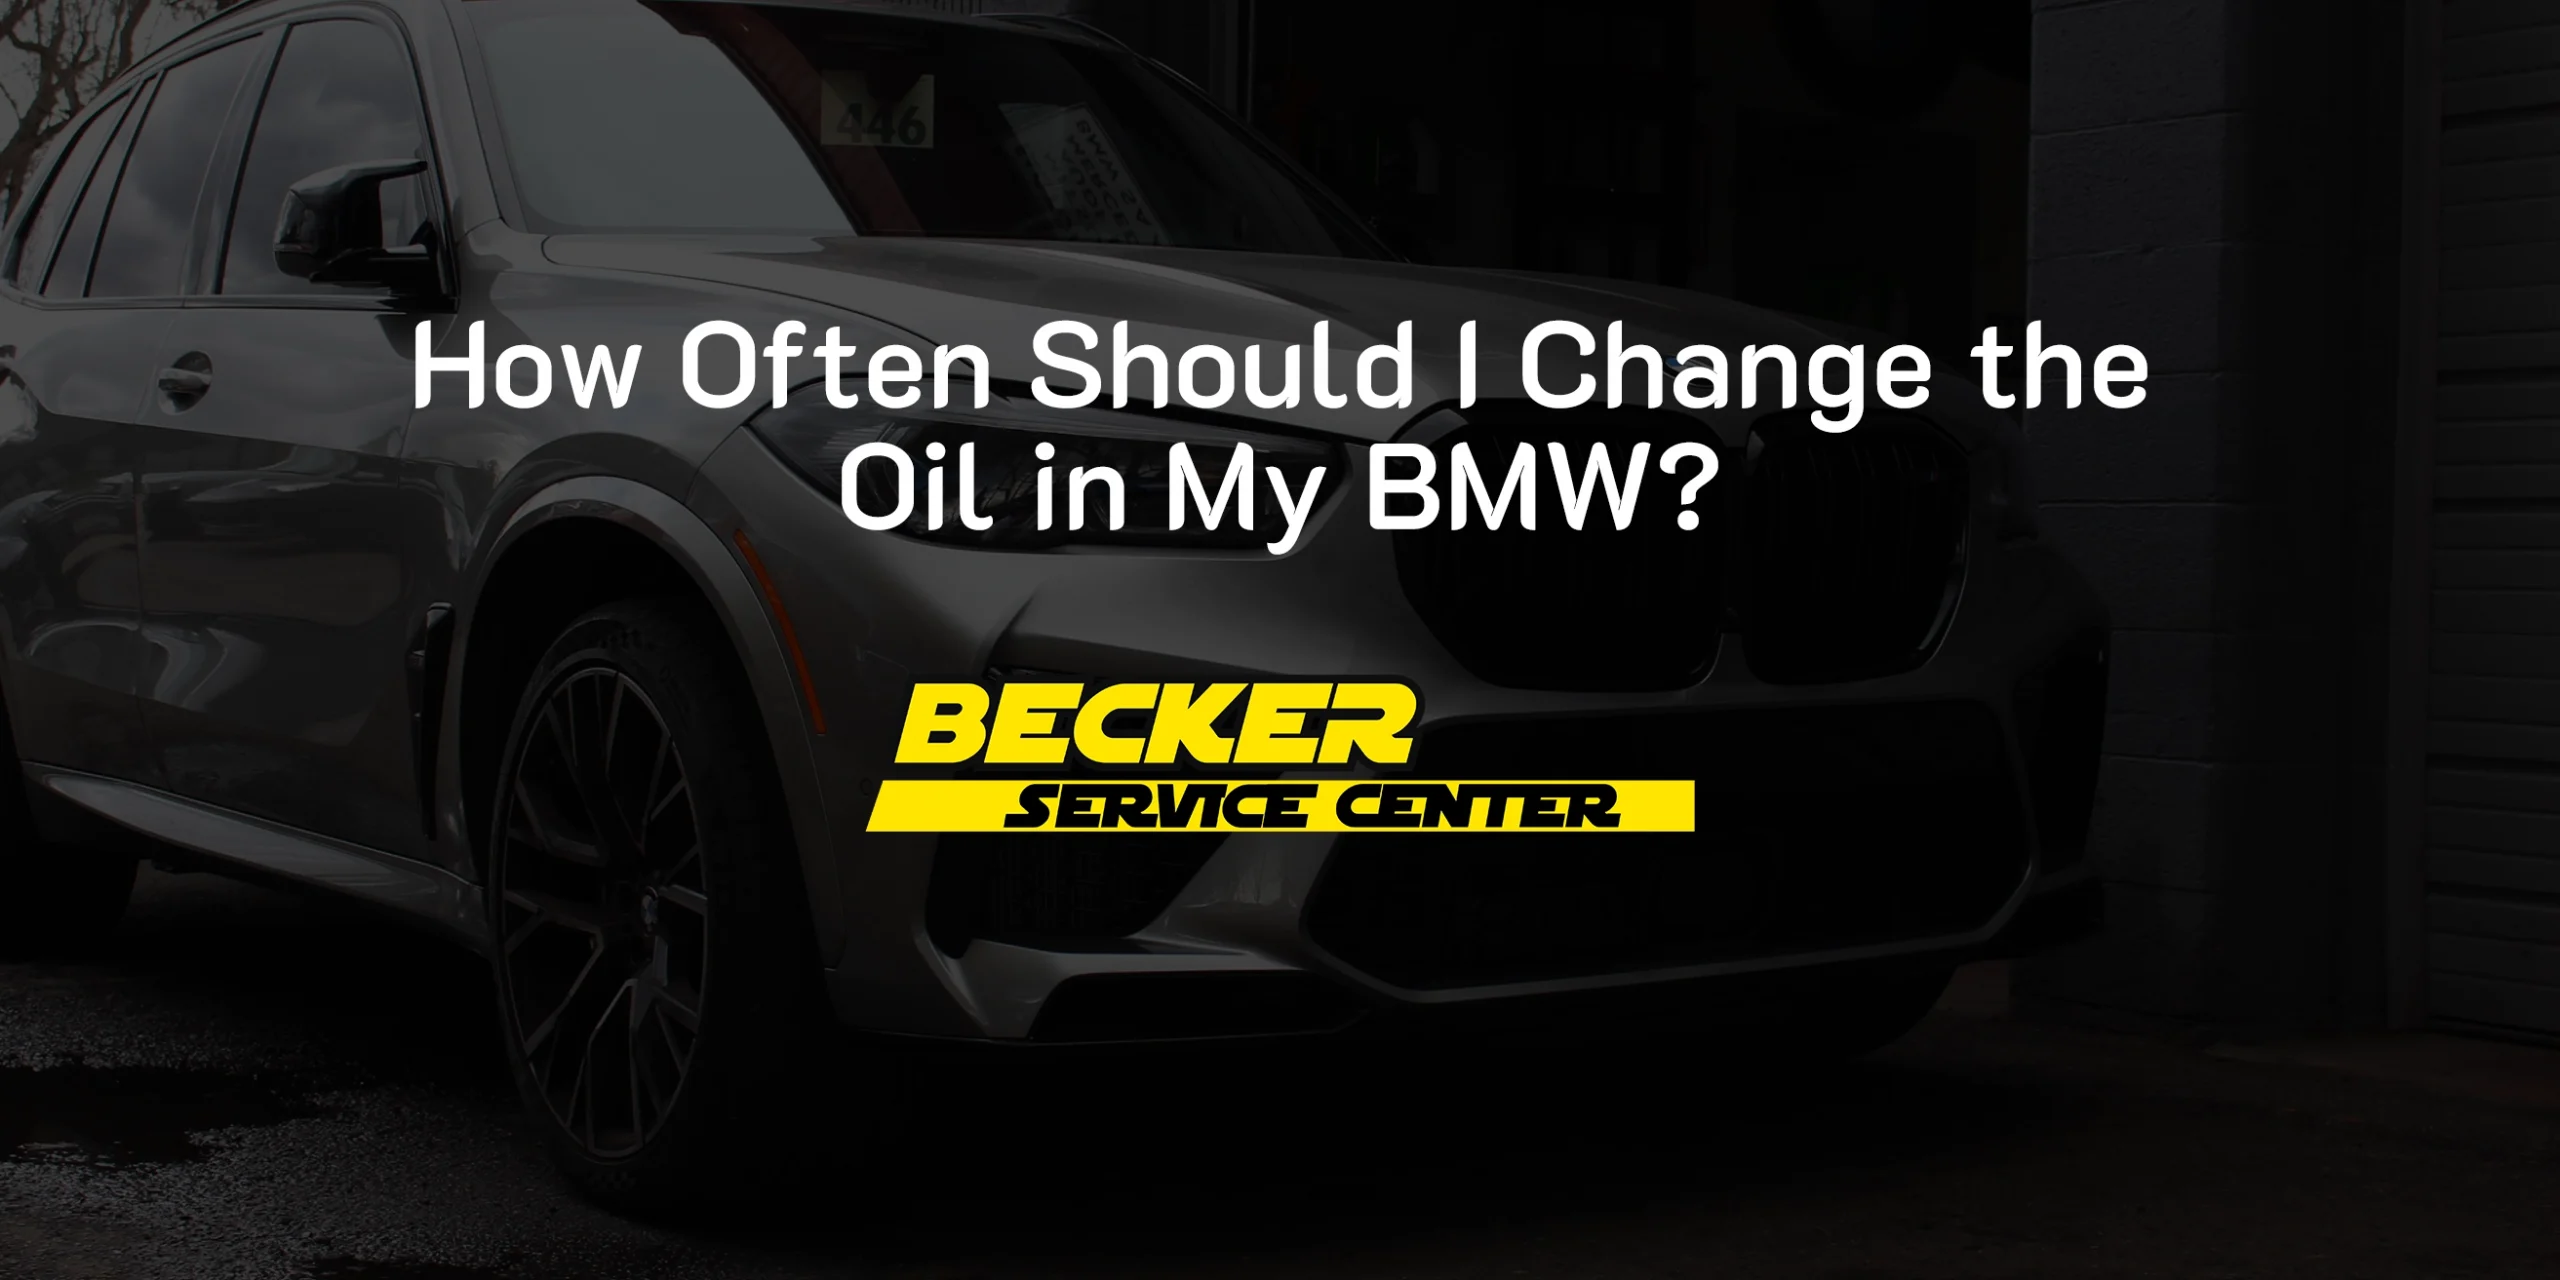 How Often Should I Change the Oil in My BMW?